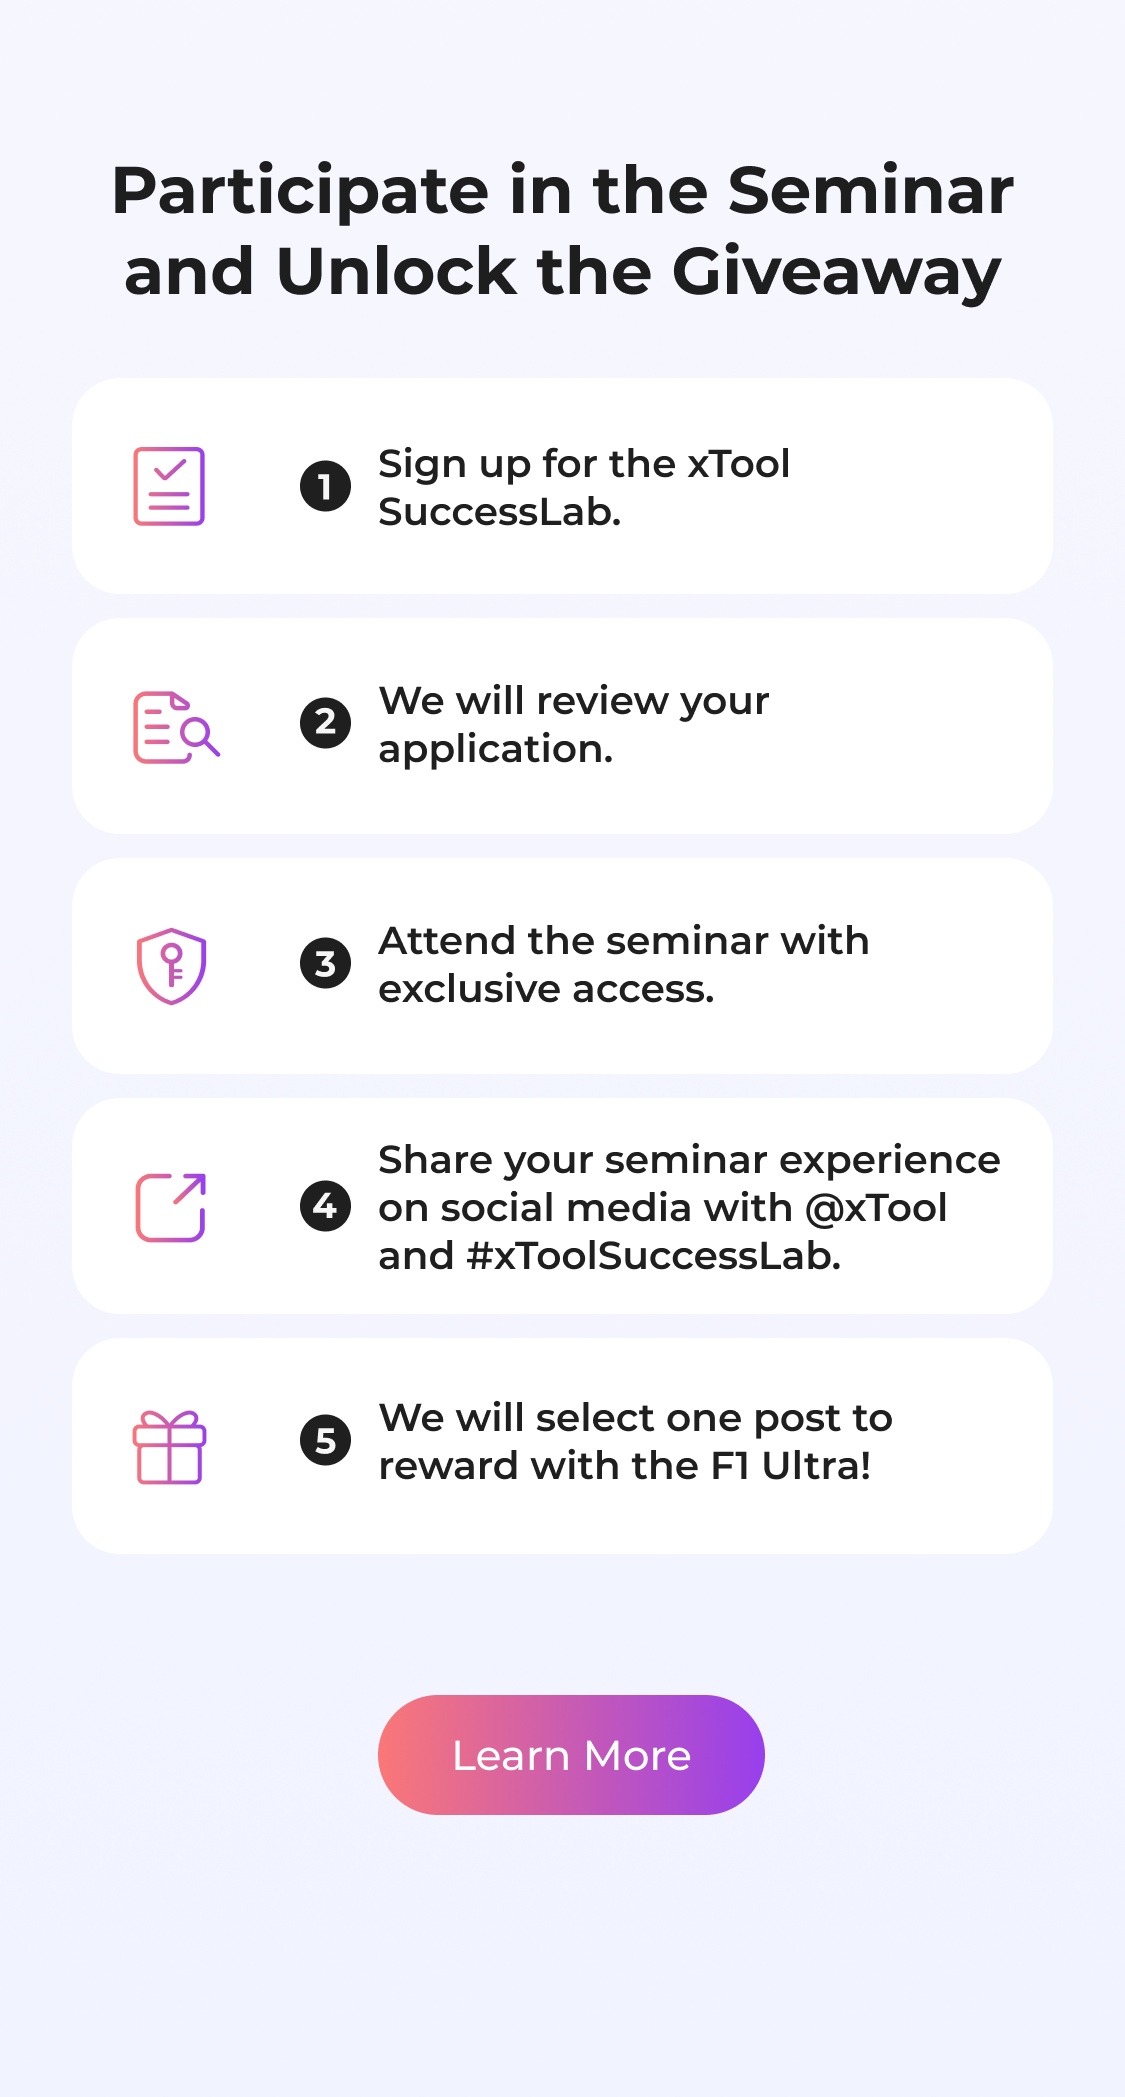 Participate in the Seminar and Unlock Giveaway